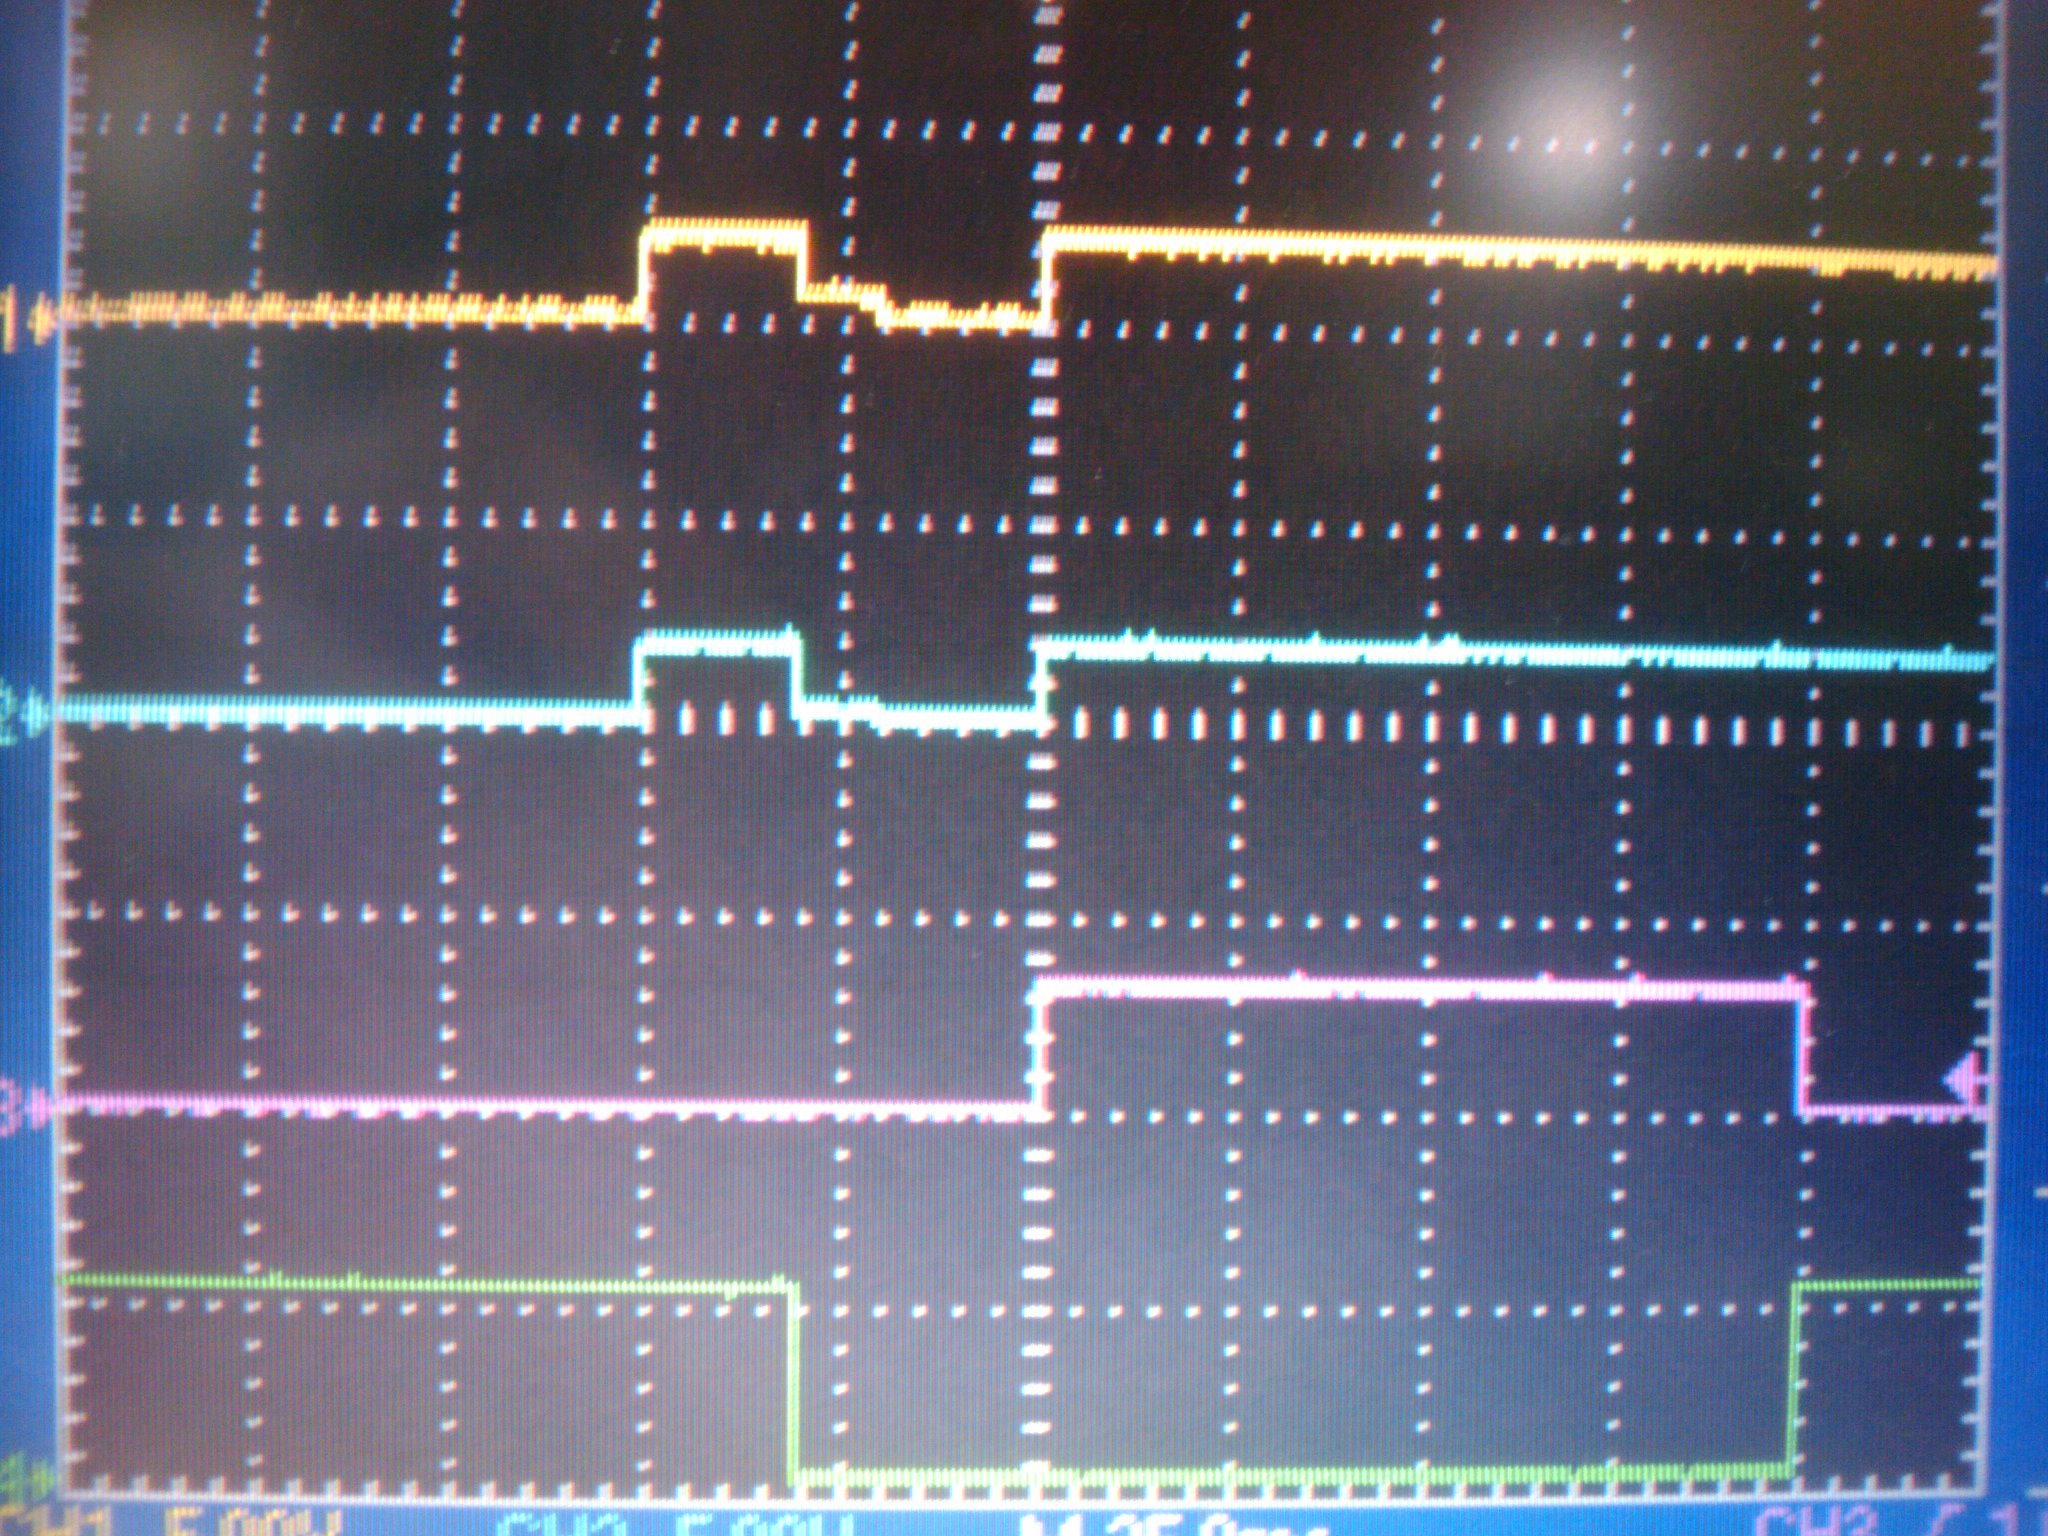 An oscilloscope trace showing 4 channels of the sequencer output for a standard experiment.